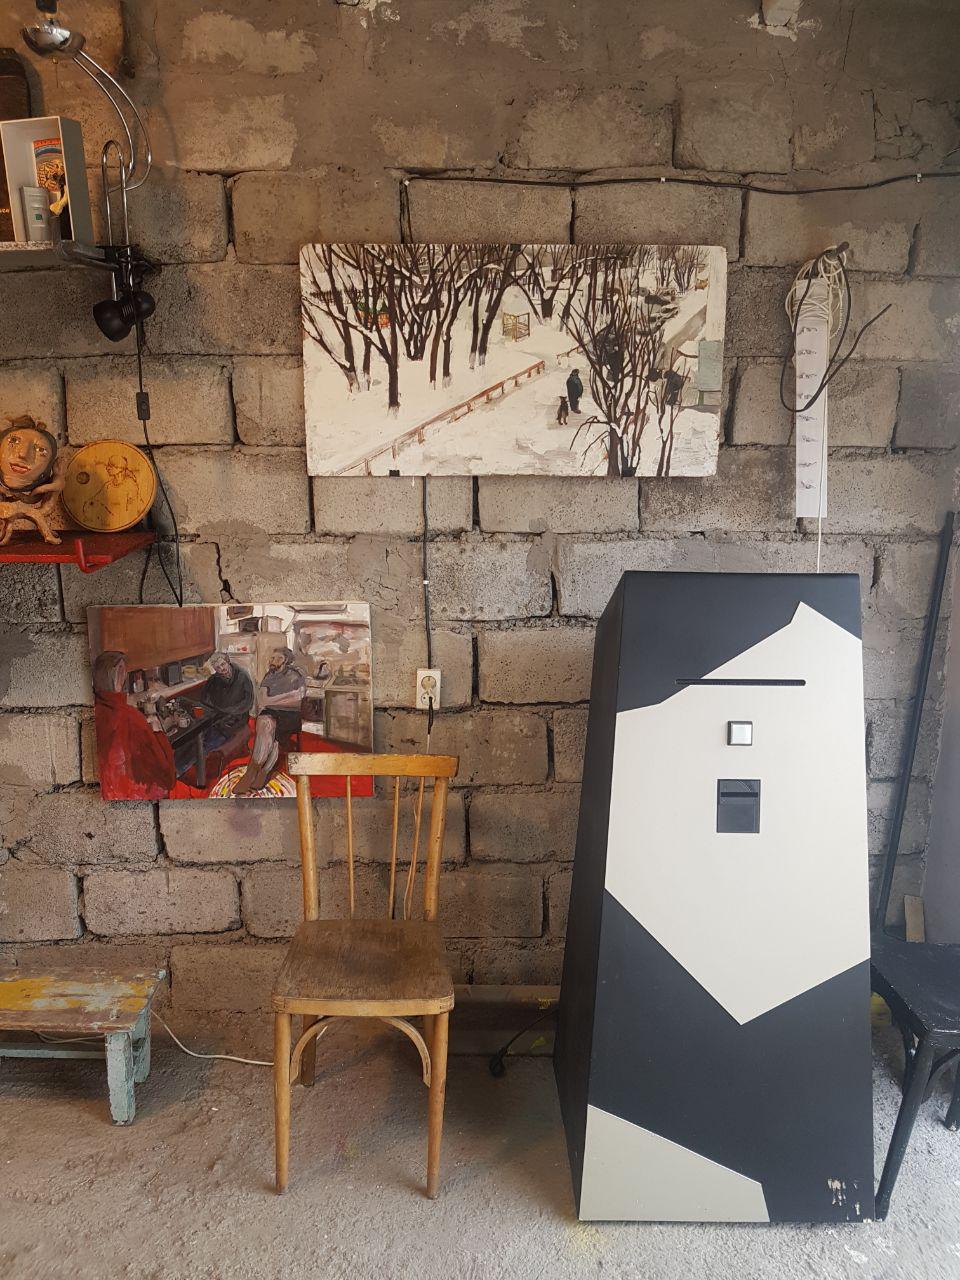 Bankomart at the Narodnaya gallery, 2019. By putting a note of any value into the machine, a user will get an authentic artwork